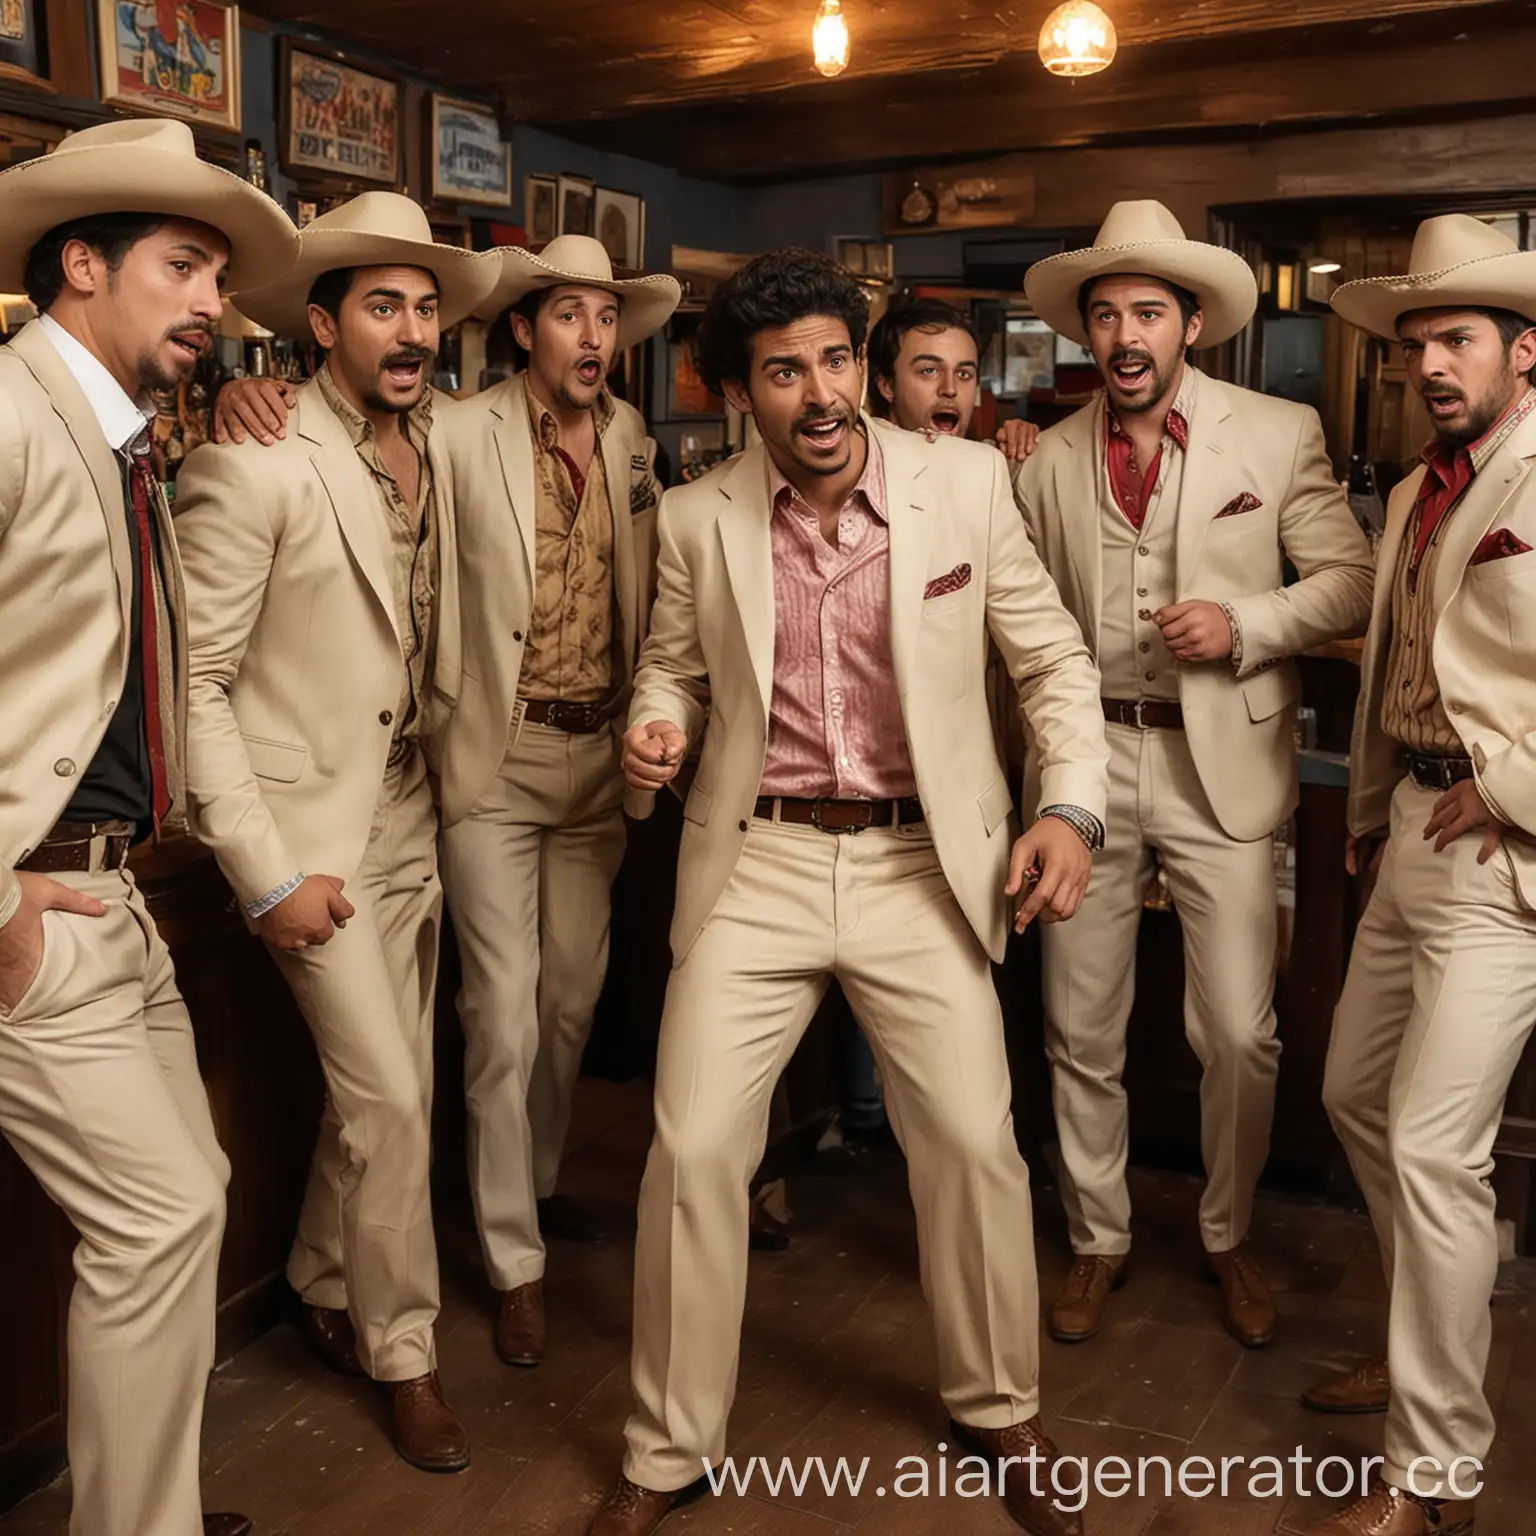 Six-Friends-Engaged-in-a-Rowdy-Brawl-at-a-Vibrant-Mexican-Bar-Over-a-Beige-Suit